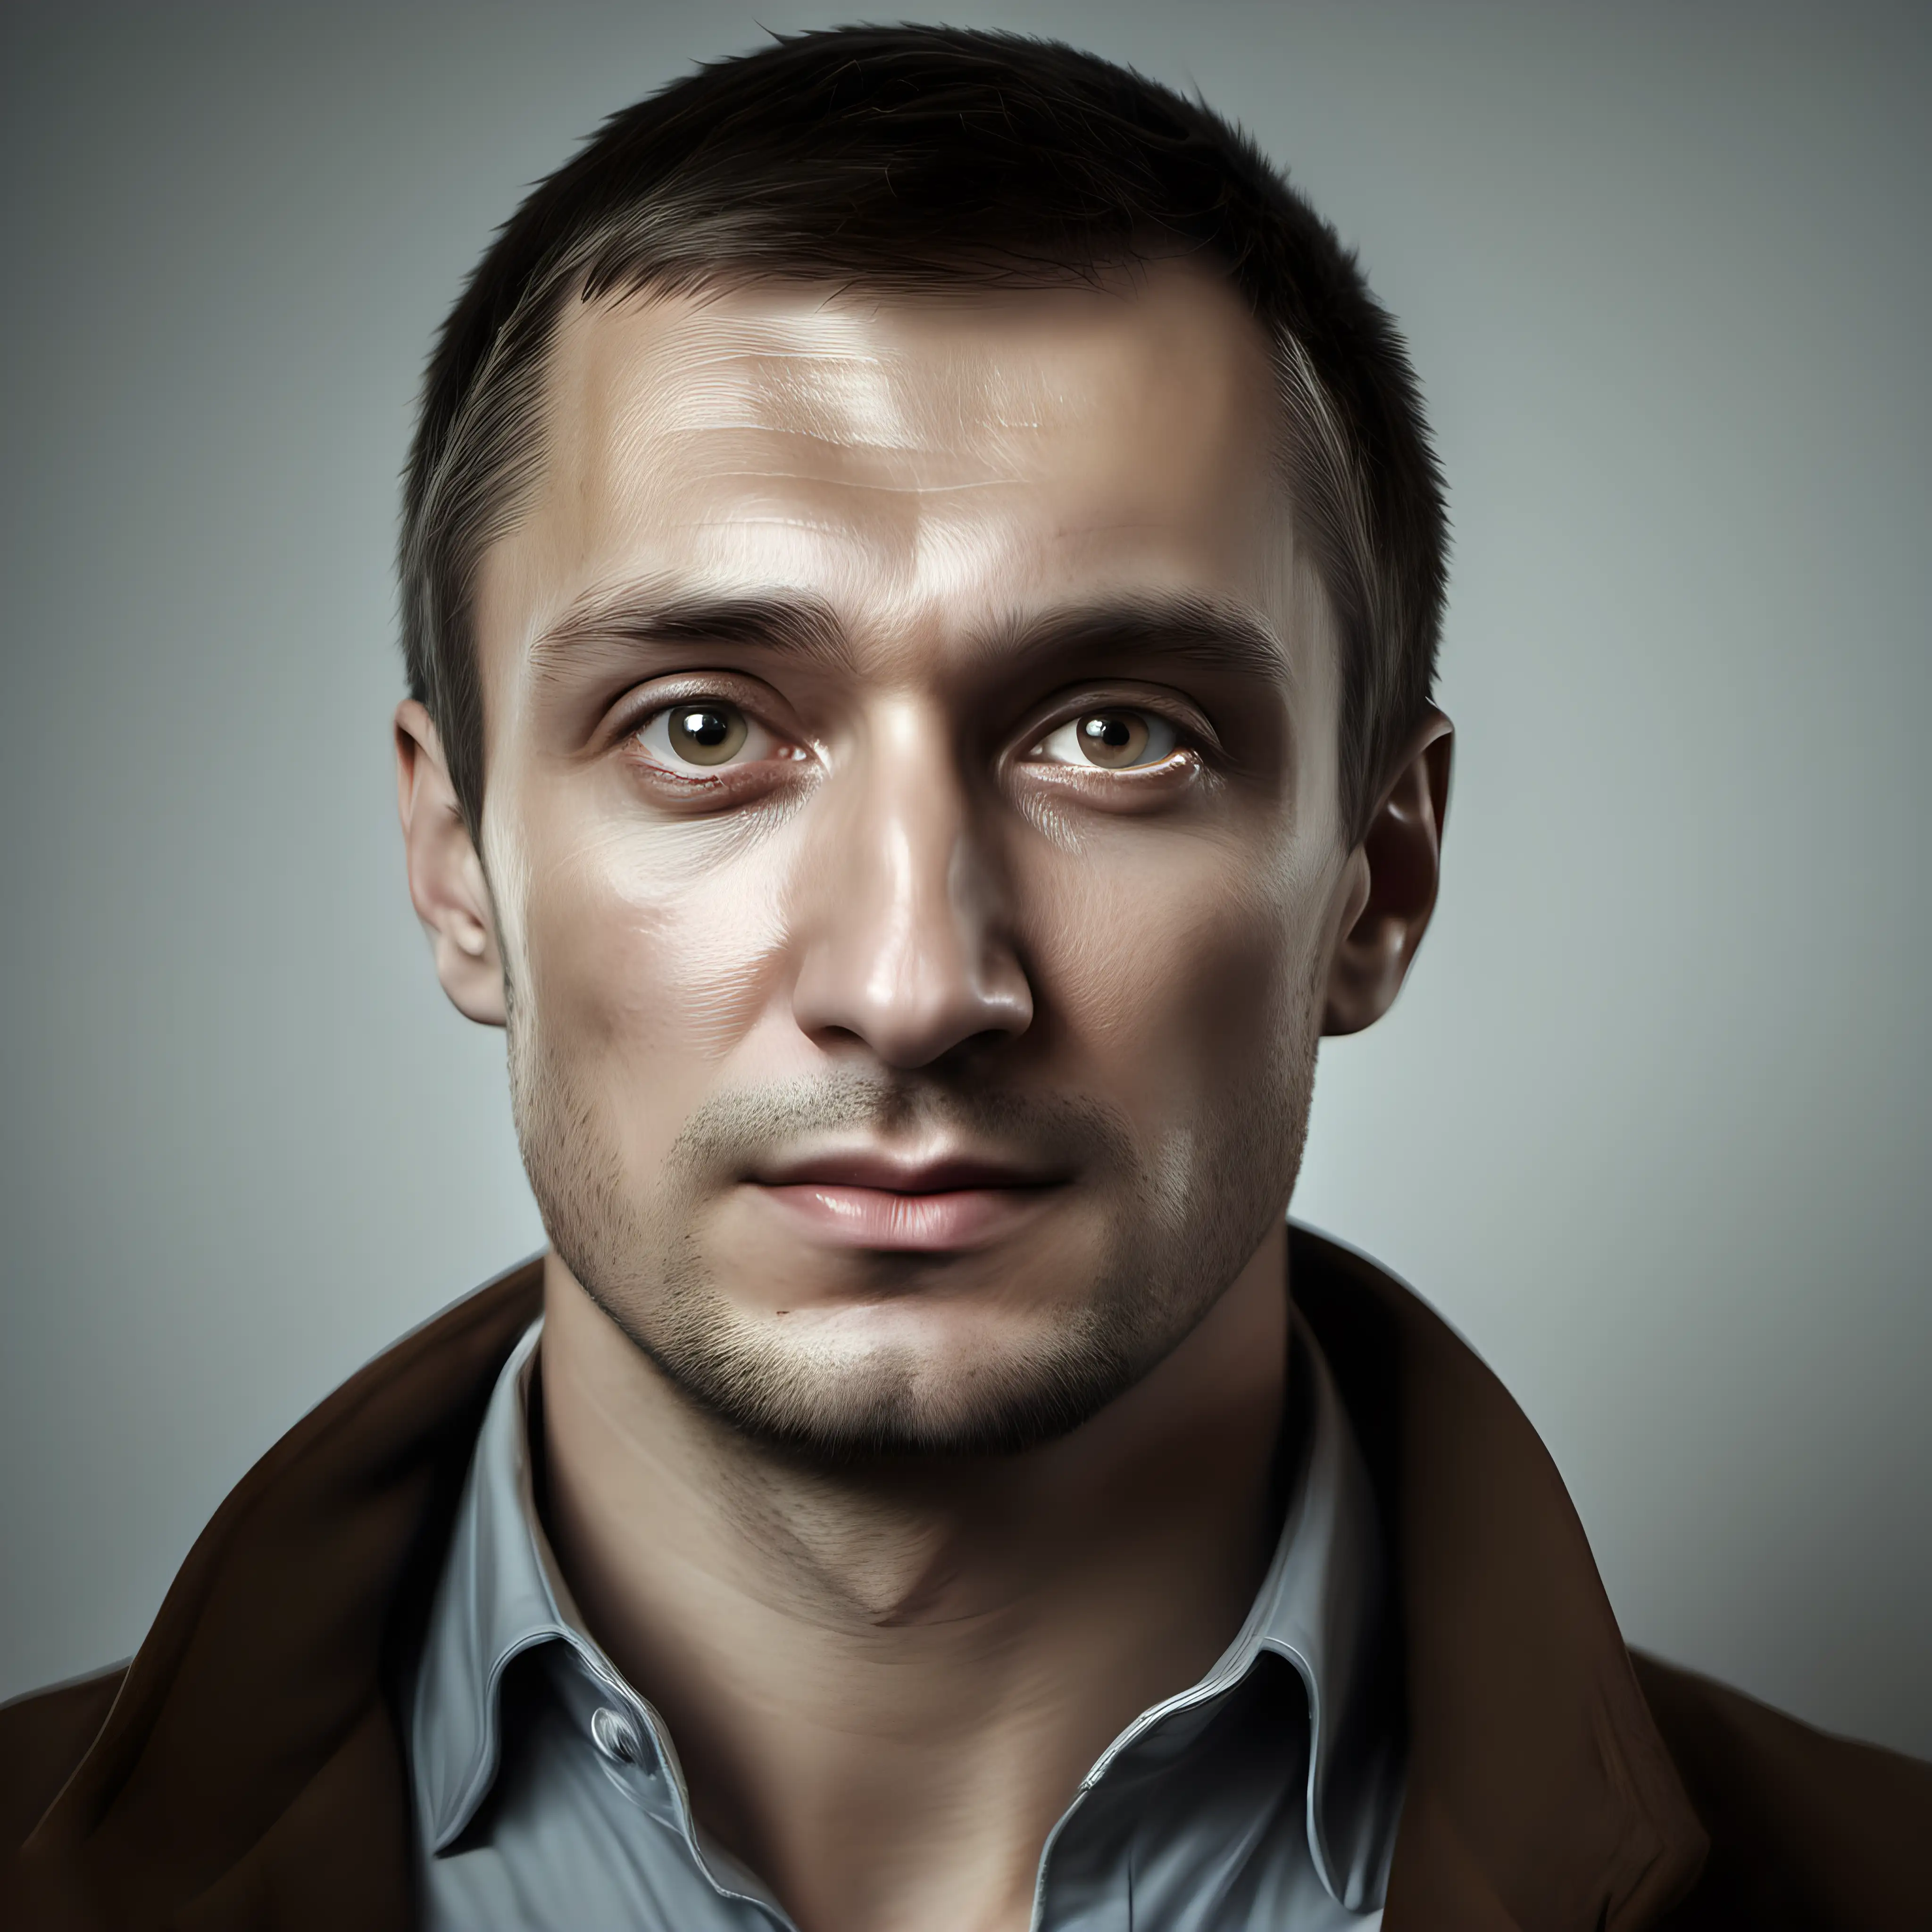 Portrait of a Confident Russian Man Age 35 Directly Facing the Camera